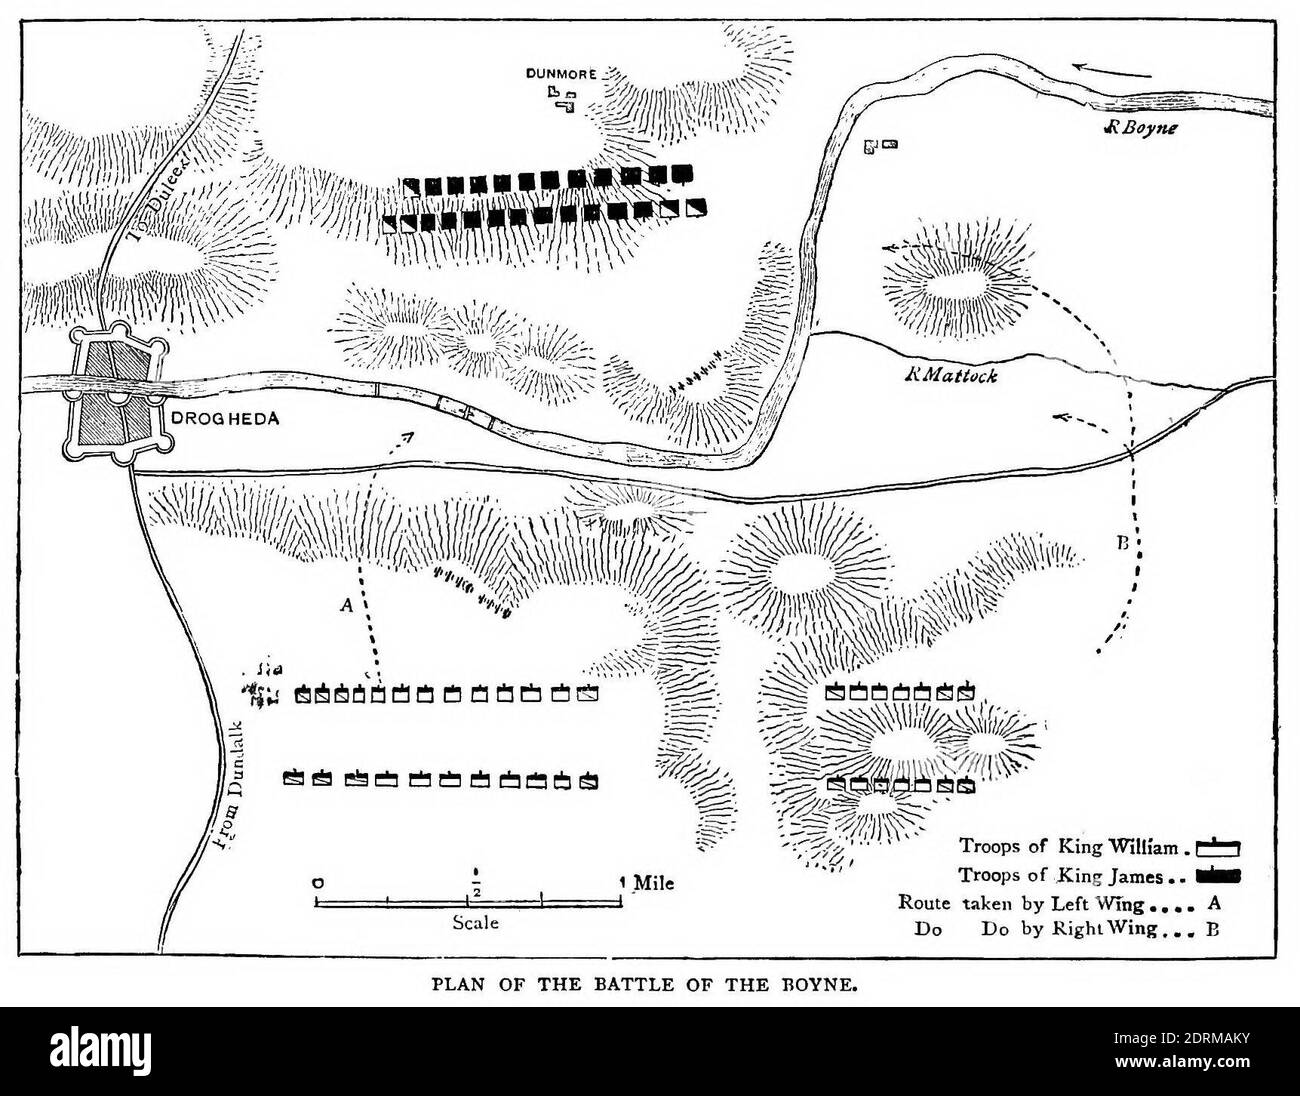 Plan of the Battle of the Boyne 1690. King James II versus King William III . Fought near Drogheda, it lead to Protestant rule in Ireland. Stock Photo